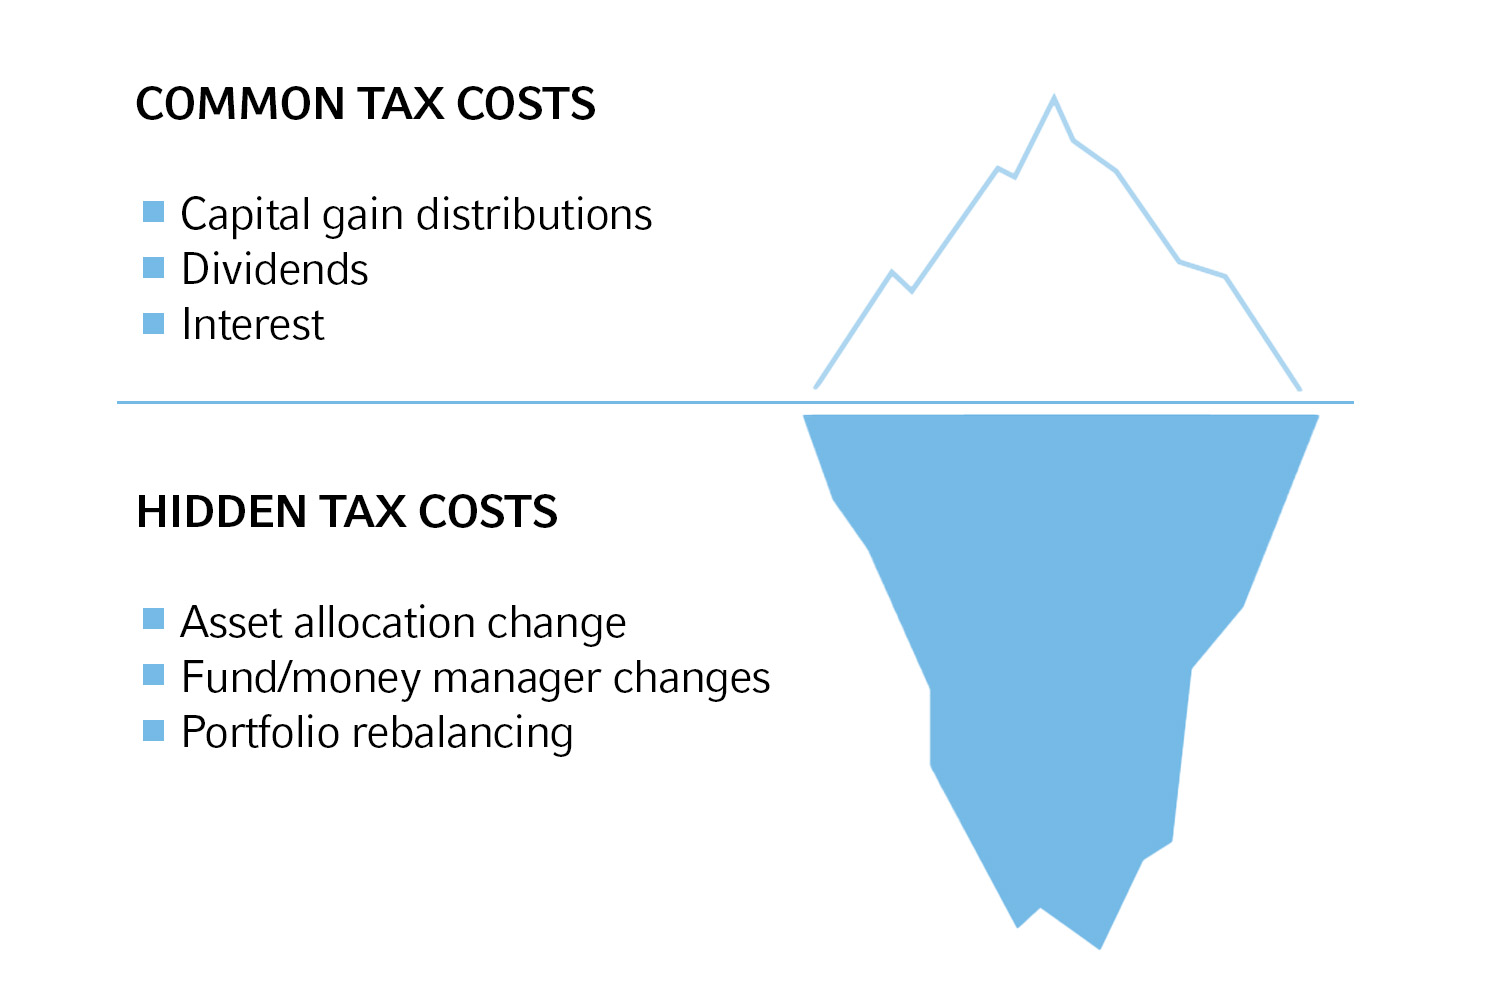 Common and hidden tax costs